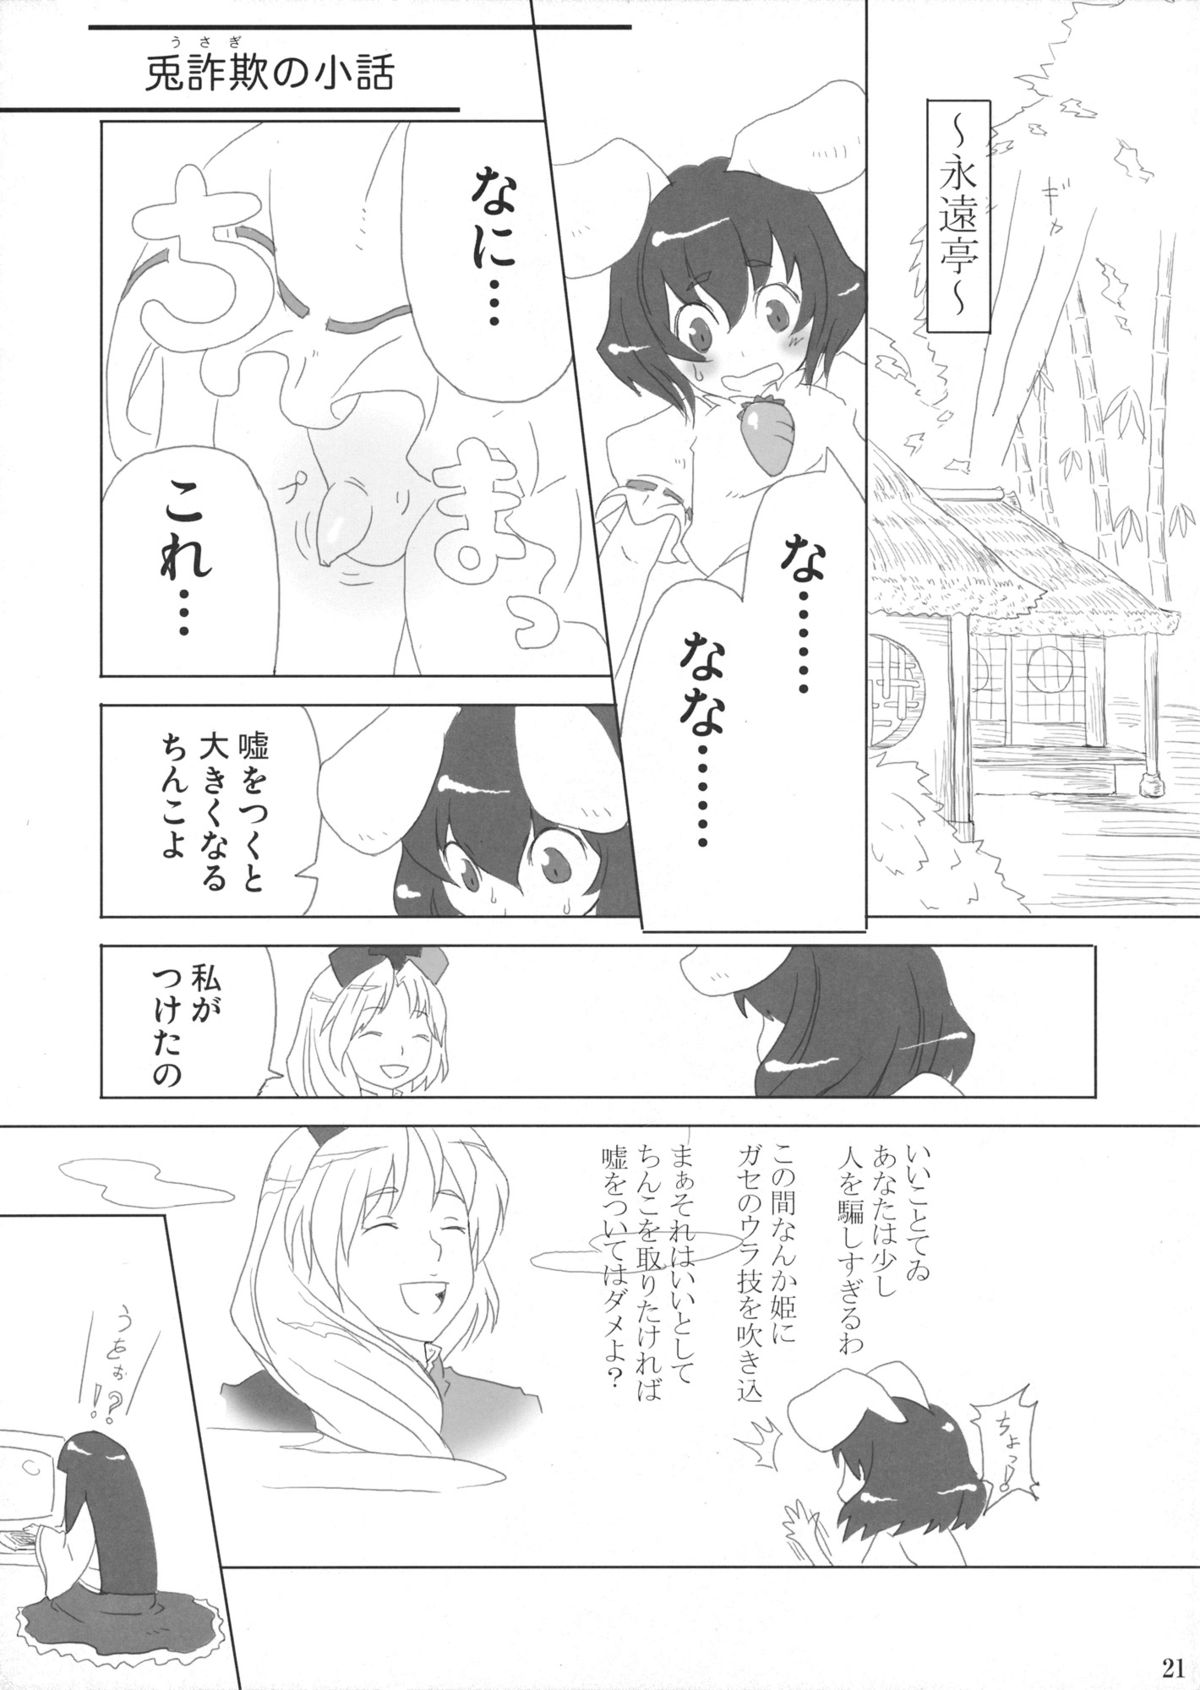 (C71) [Include (ふぅりすと, でっこ)] 因幡の白濁ウサギ (東方Project)